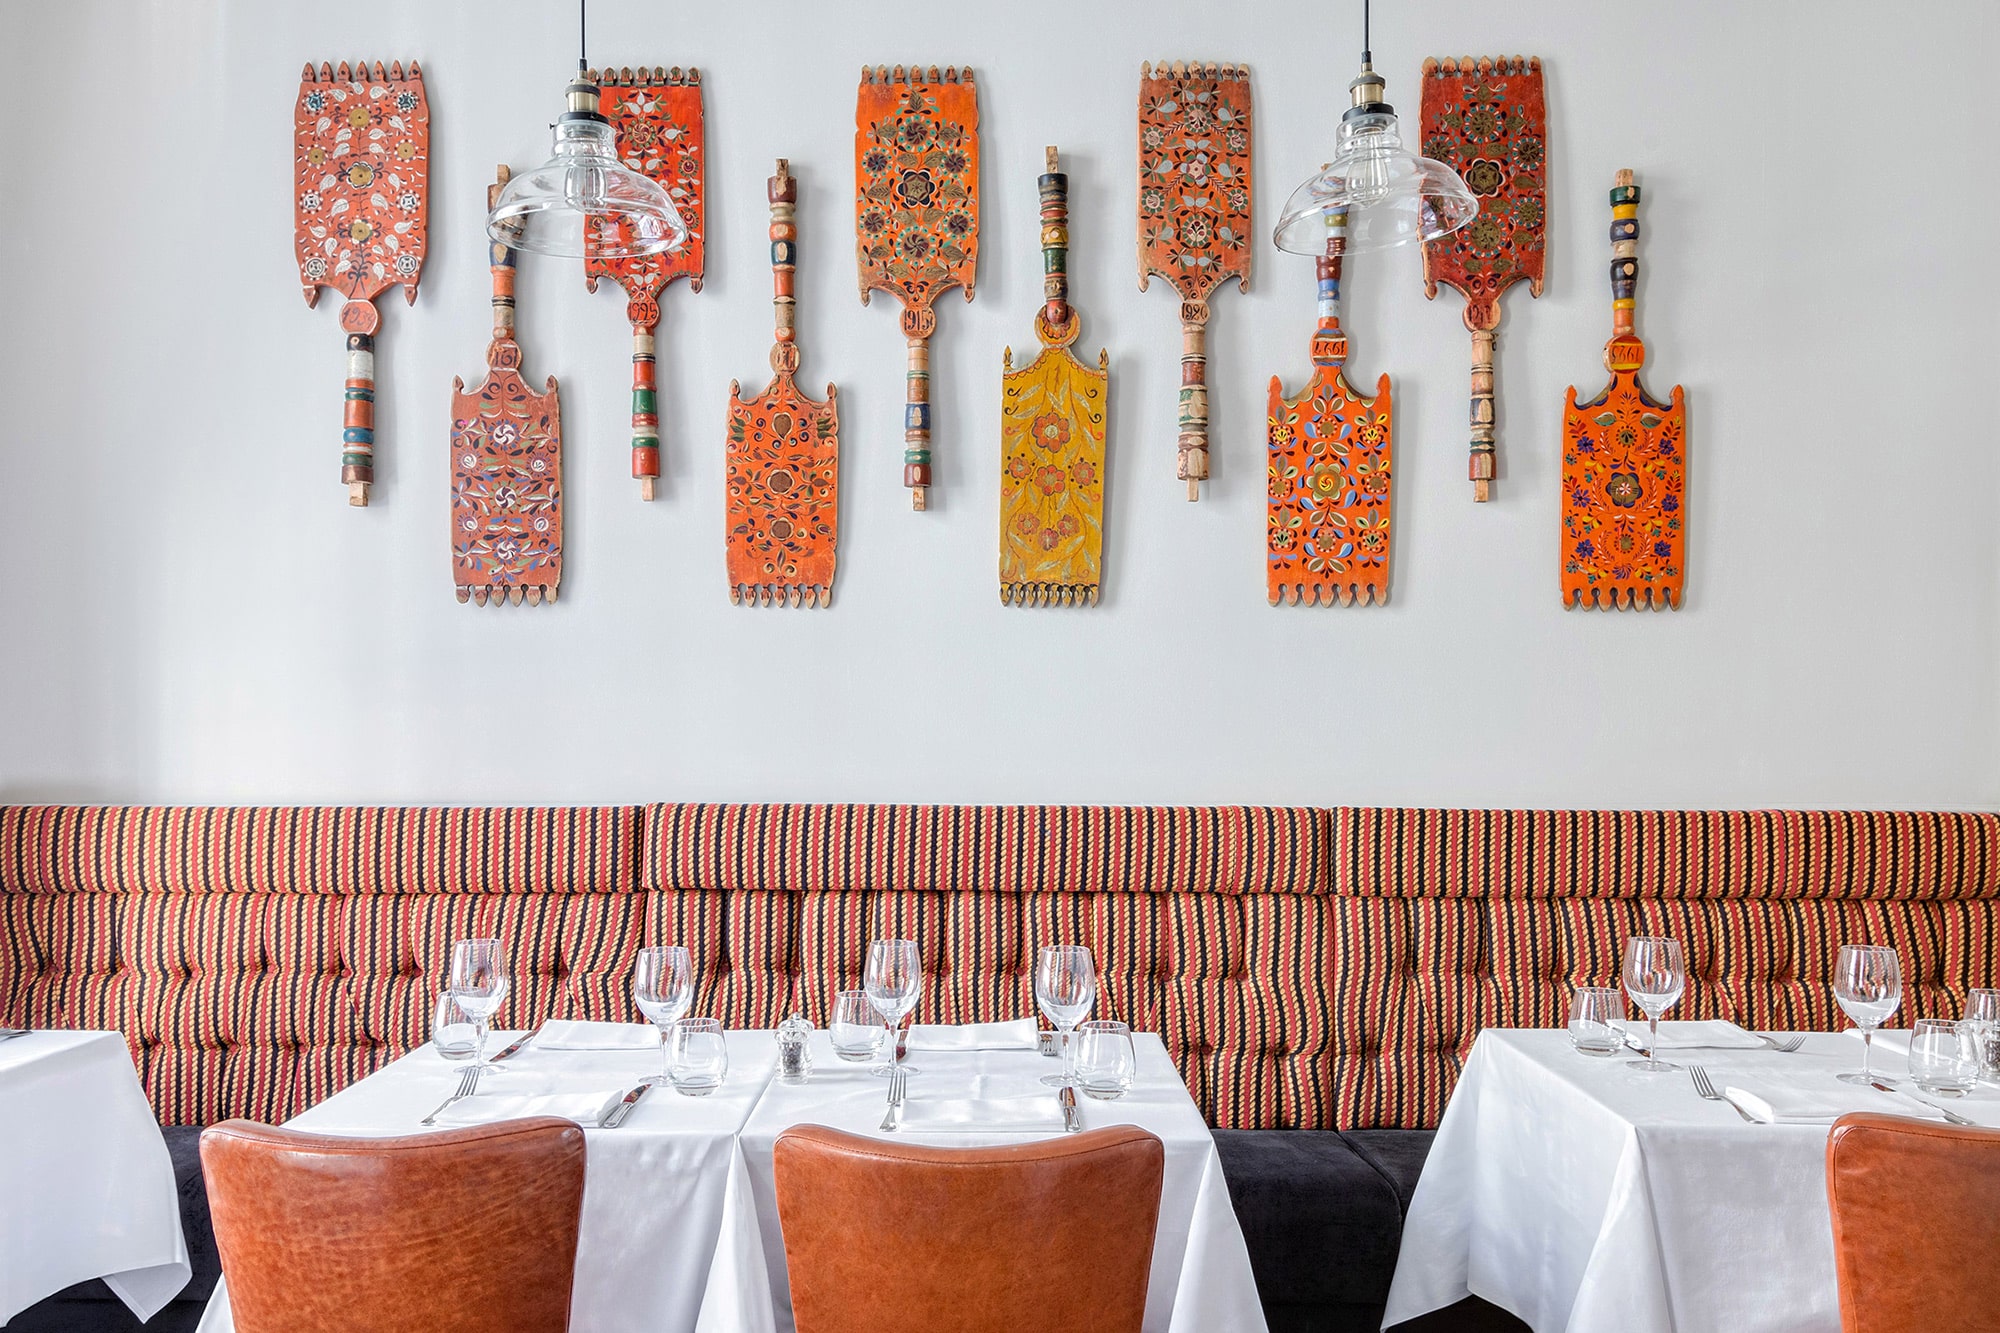 Interior photo of a Russian restaurant: orange leather chairs; tables with white cloths; traditional old Russian decor on the wall